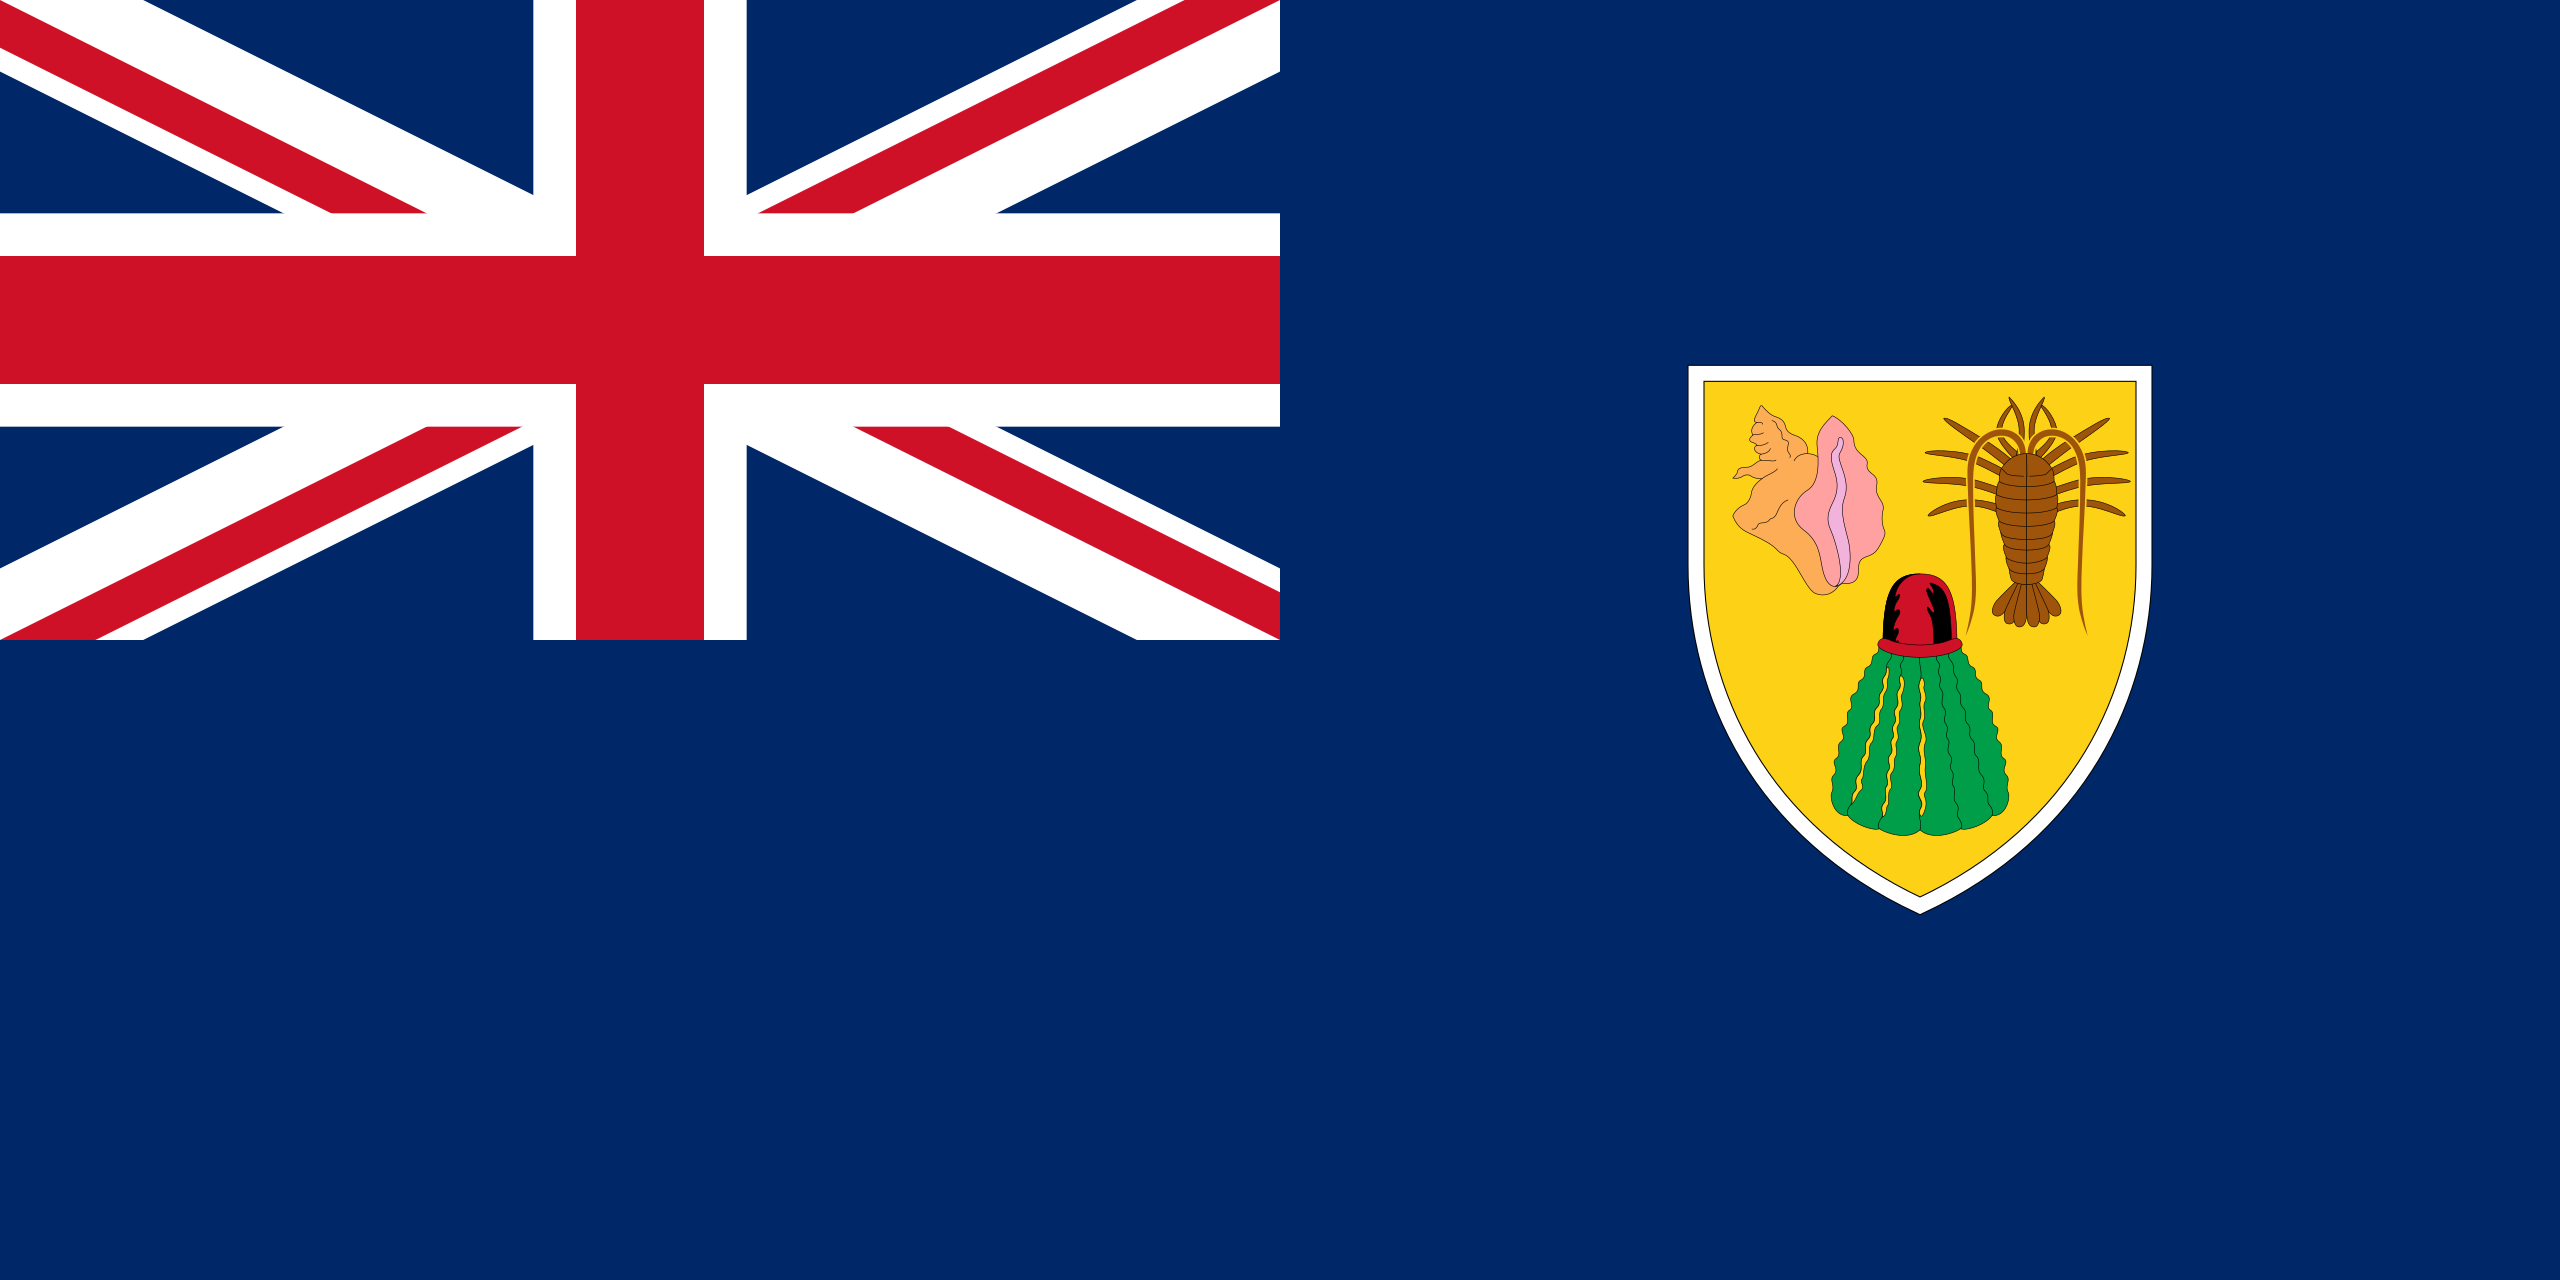 Flag_of_the_Turks_and_Caicos_Islands.svg.png (97 KB)